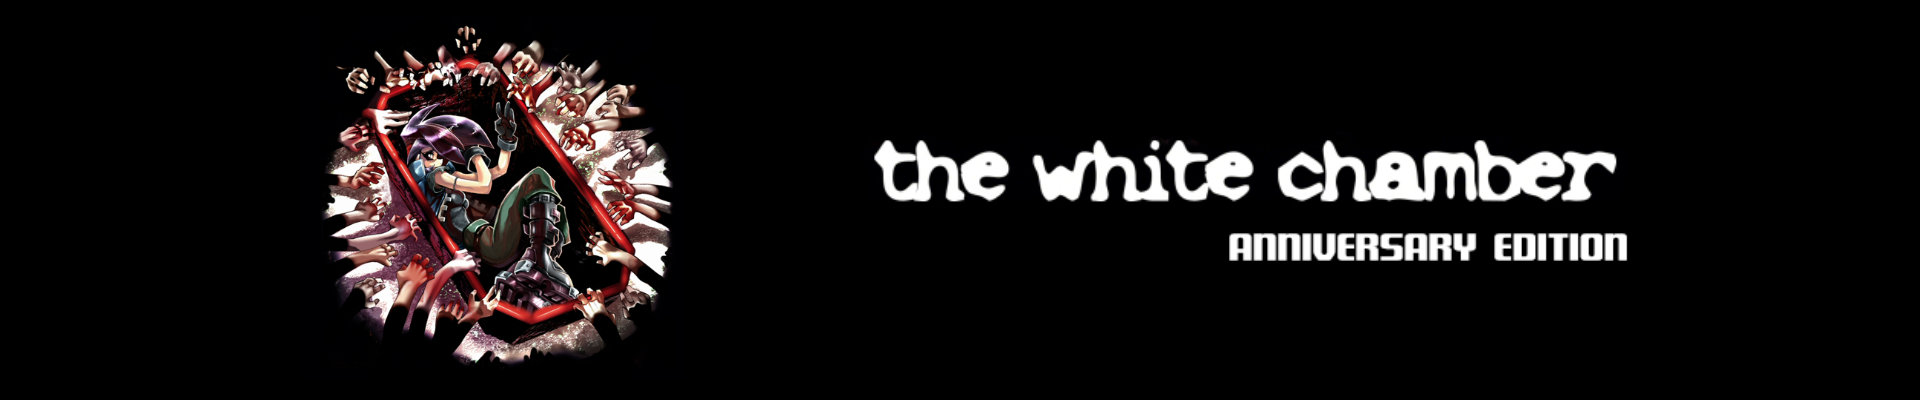 Quick thoughts on: the white chamber